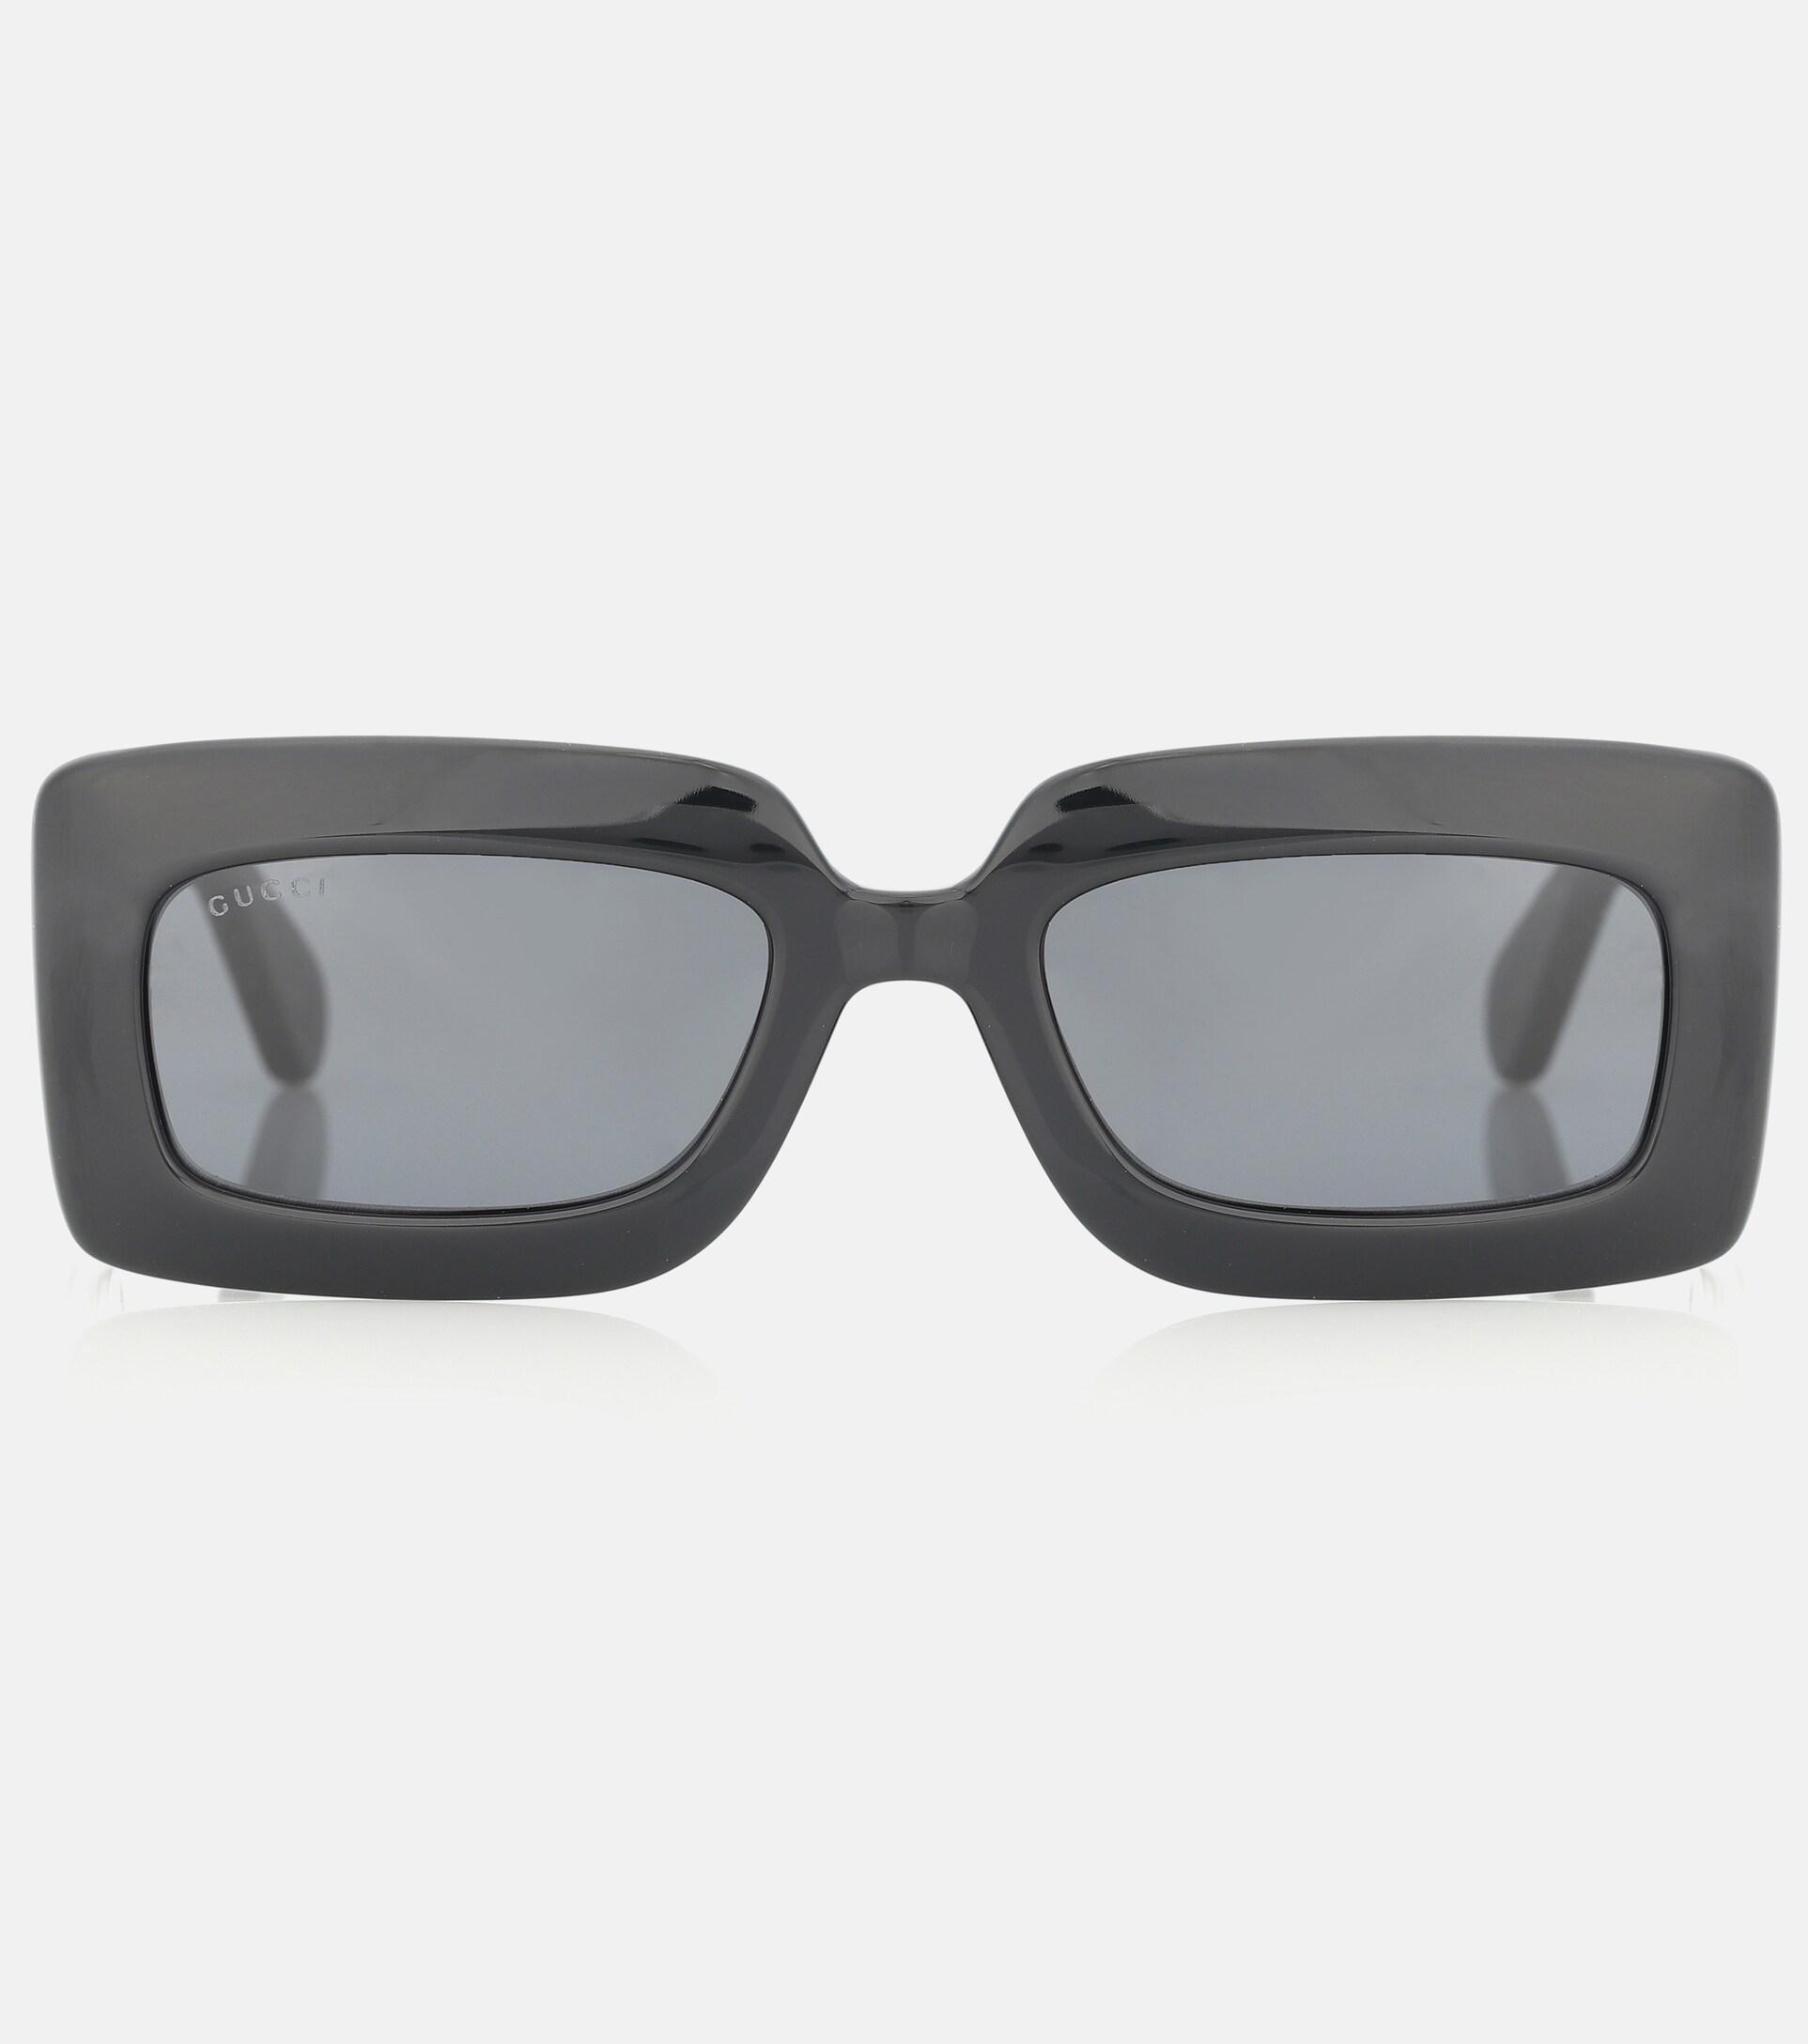 Gucci Double G Rectangular Sunglasses in Gray | Lyst